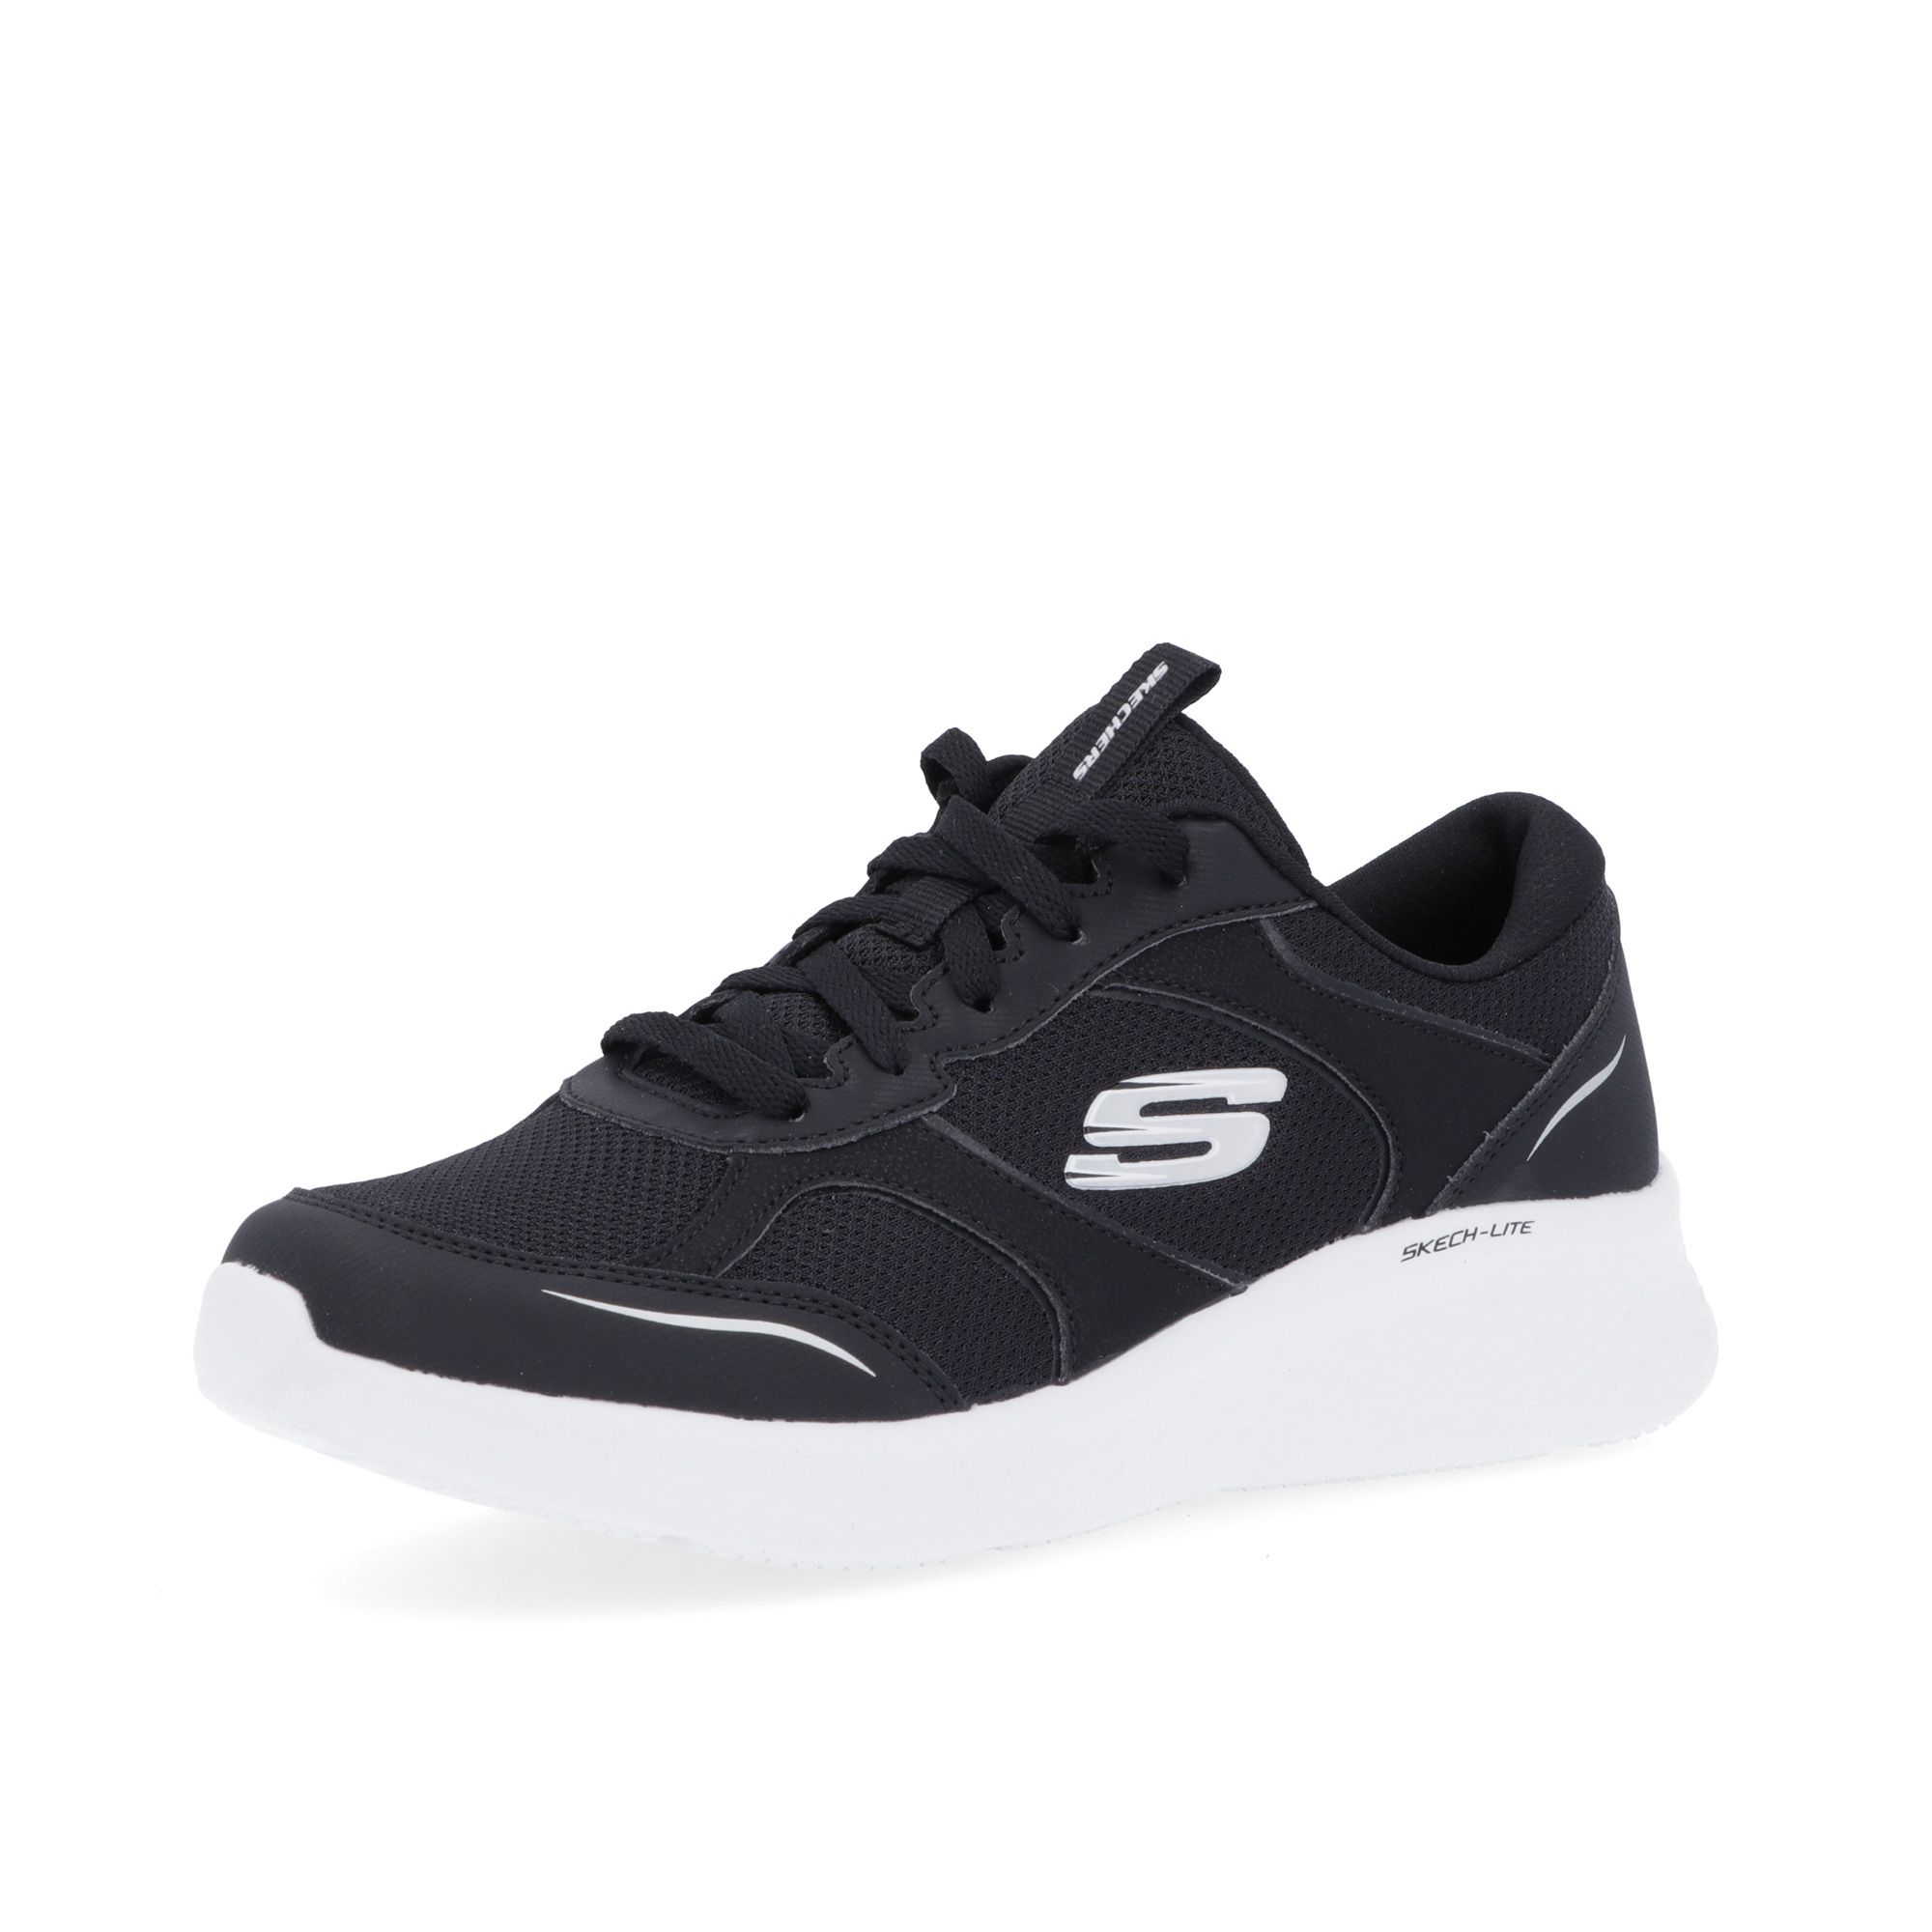 Image of Sneaker Bobs Bamina con soletta Air Cooled Memory Foam